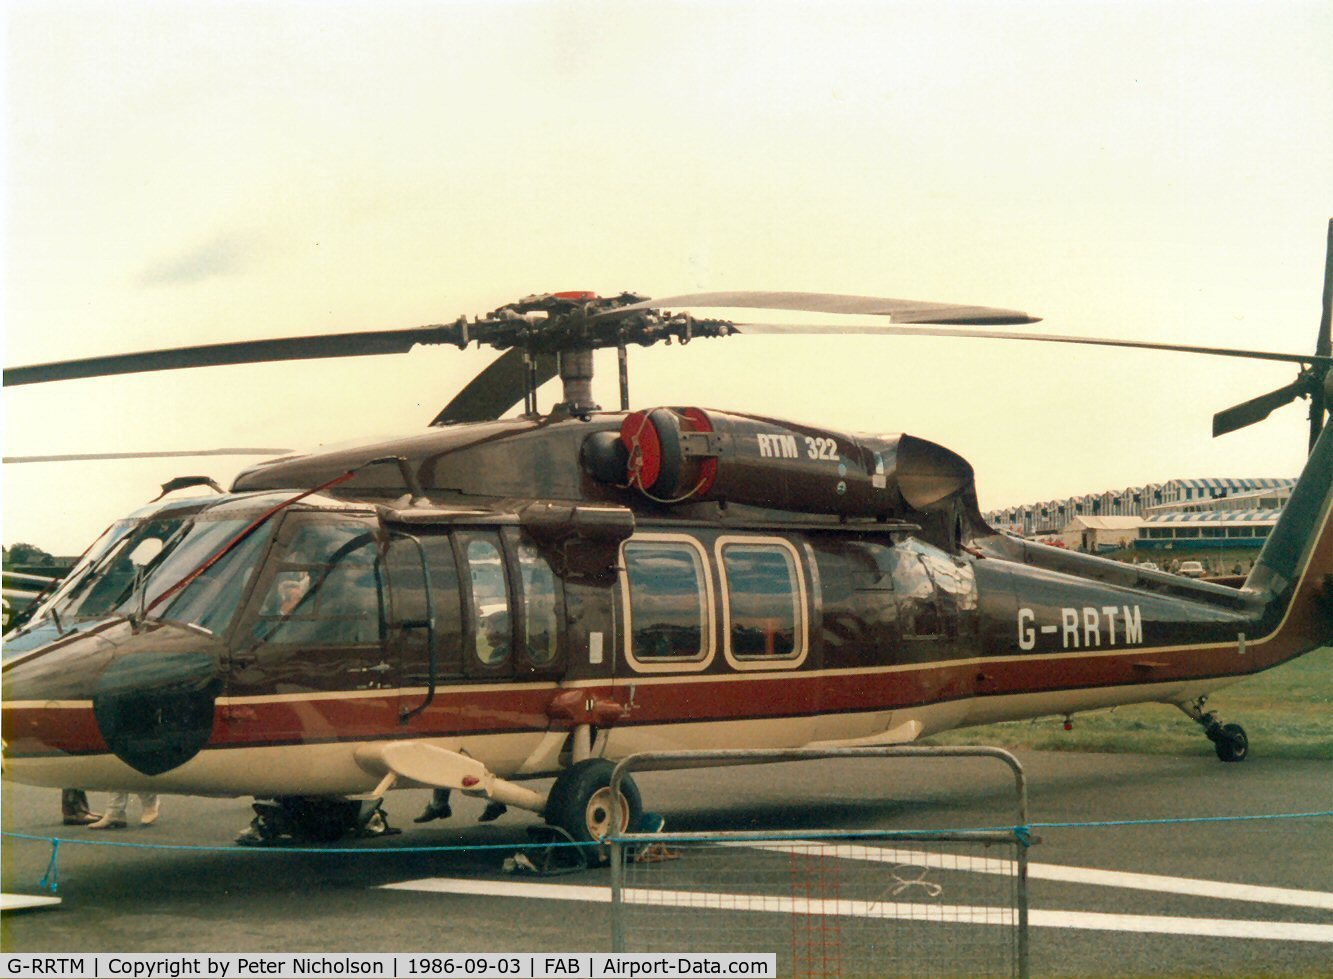 G-RRTM, 1983 Sikorsky S-70C C/N 70583, This Rolls-Royce engined Blackhawk was present at the 1986 Farnborough Airshow.